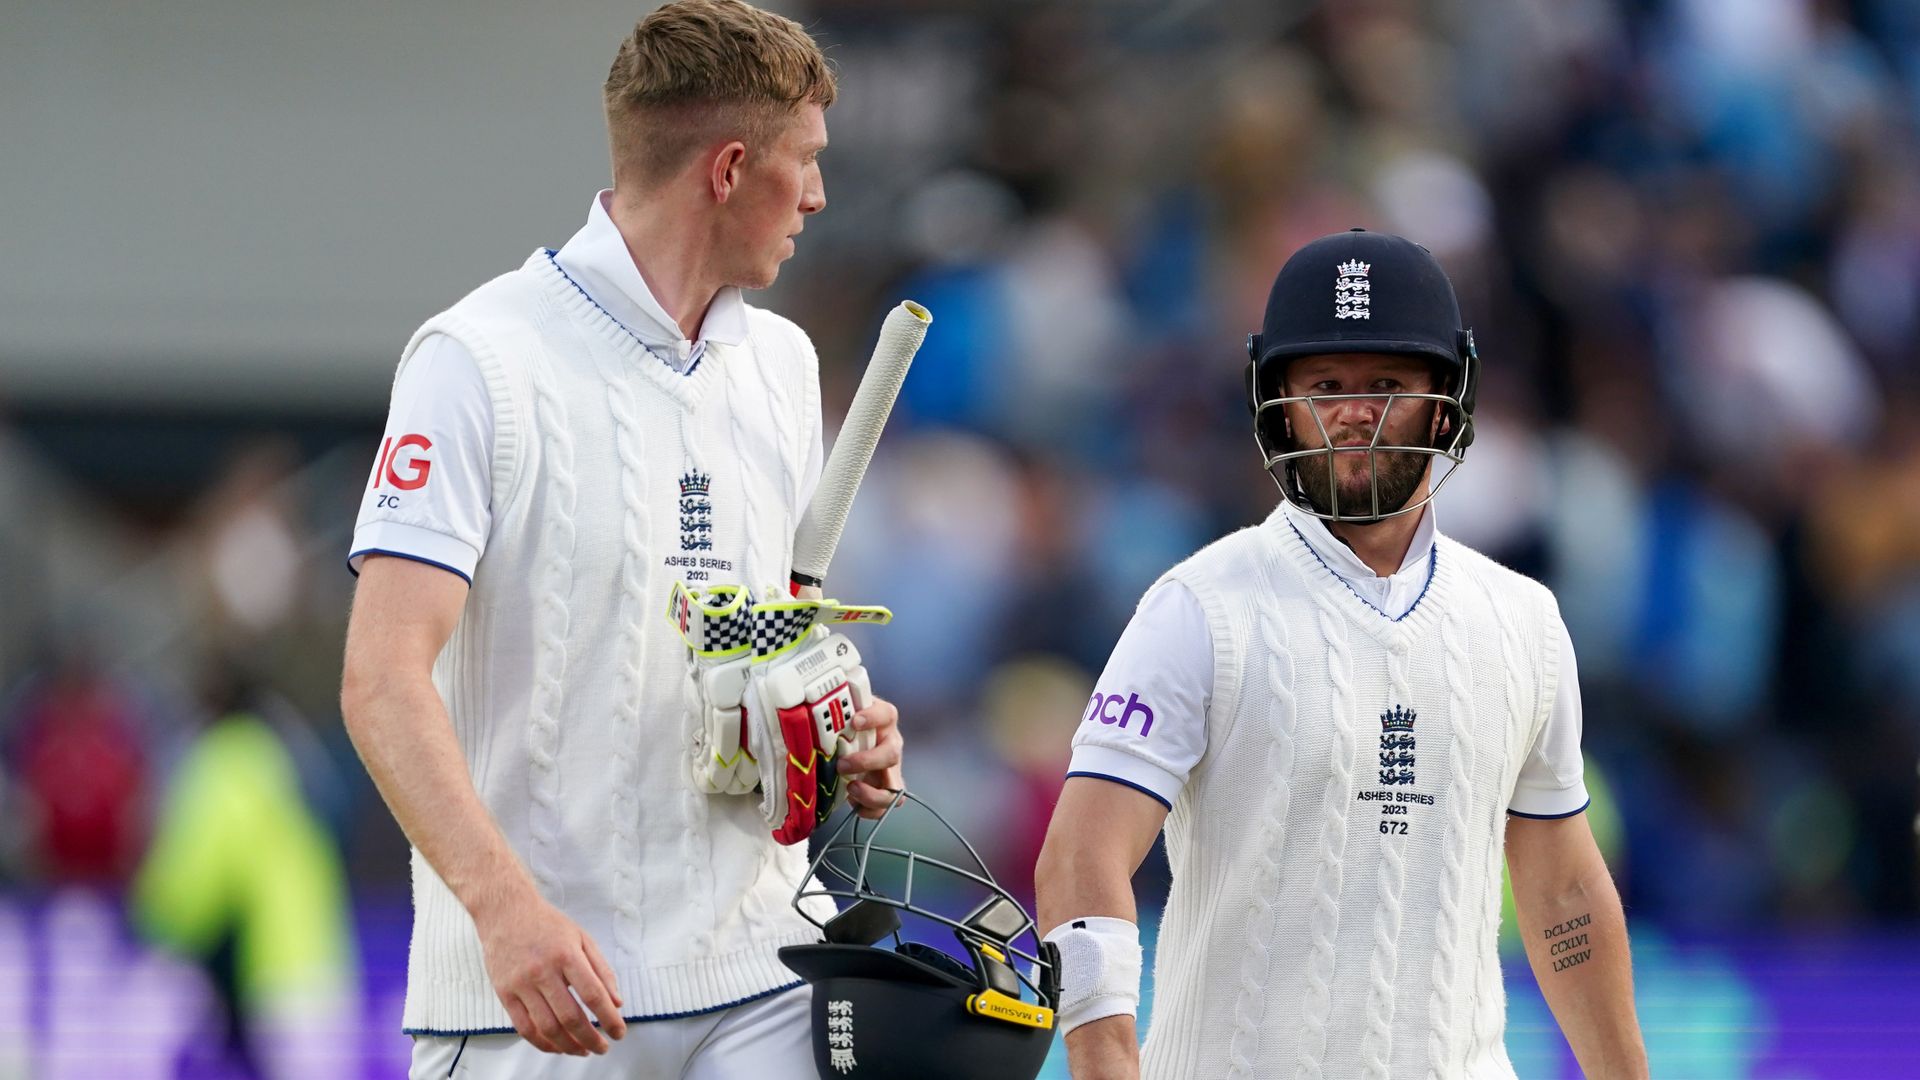 'There's a lot on the table' - State of play as England chase crucial victory